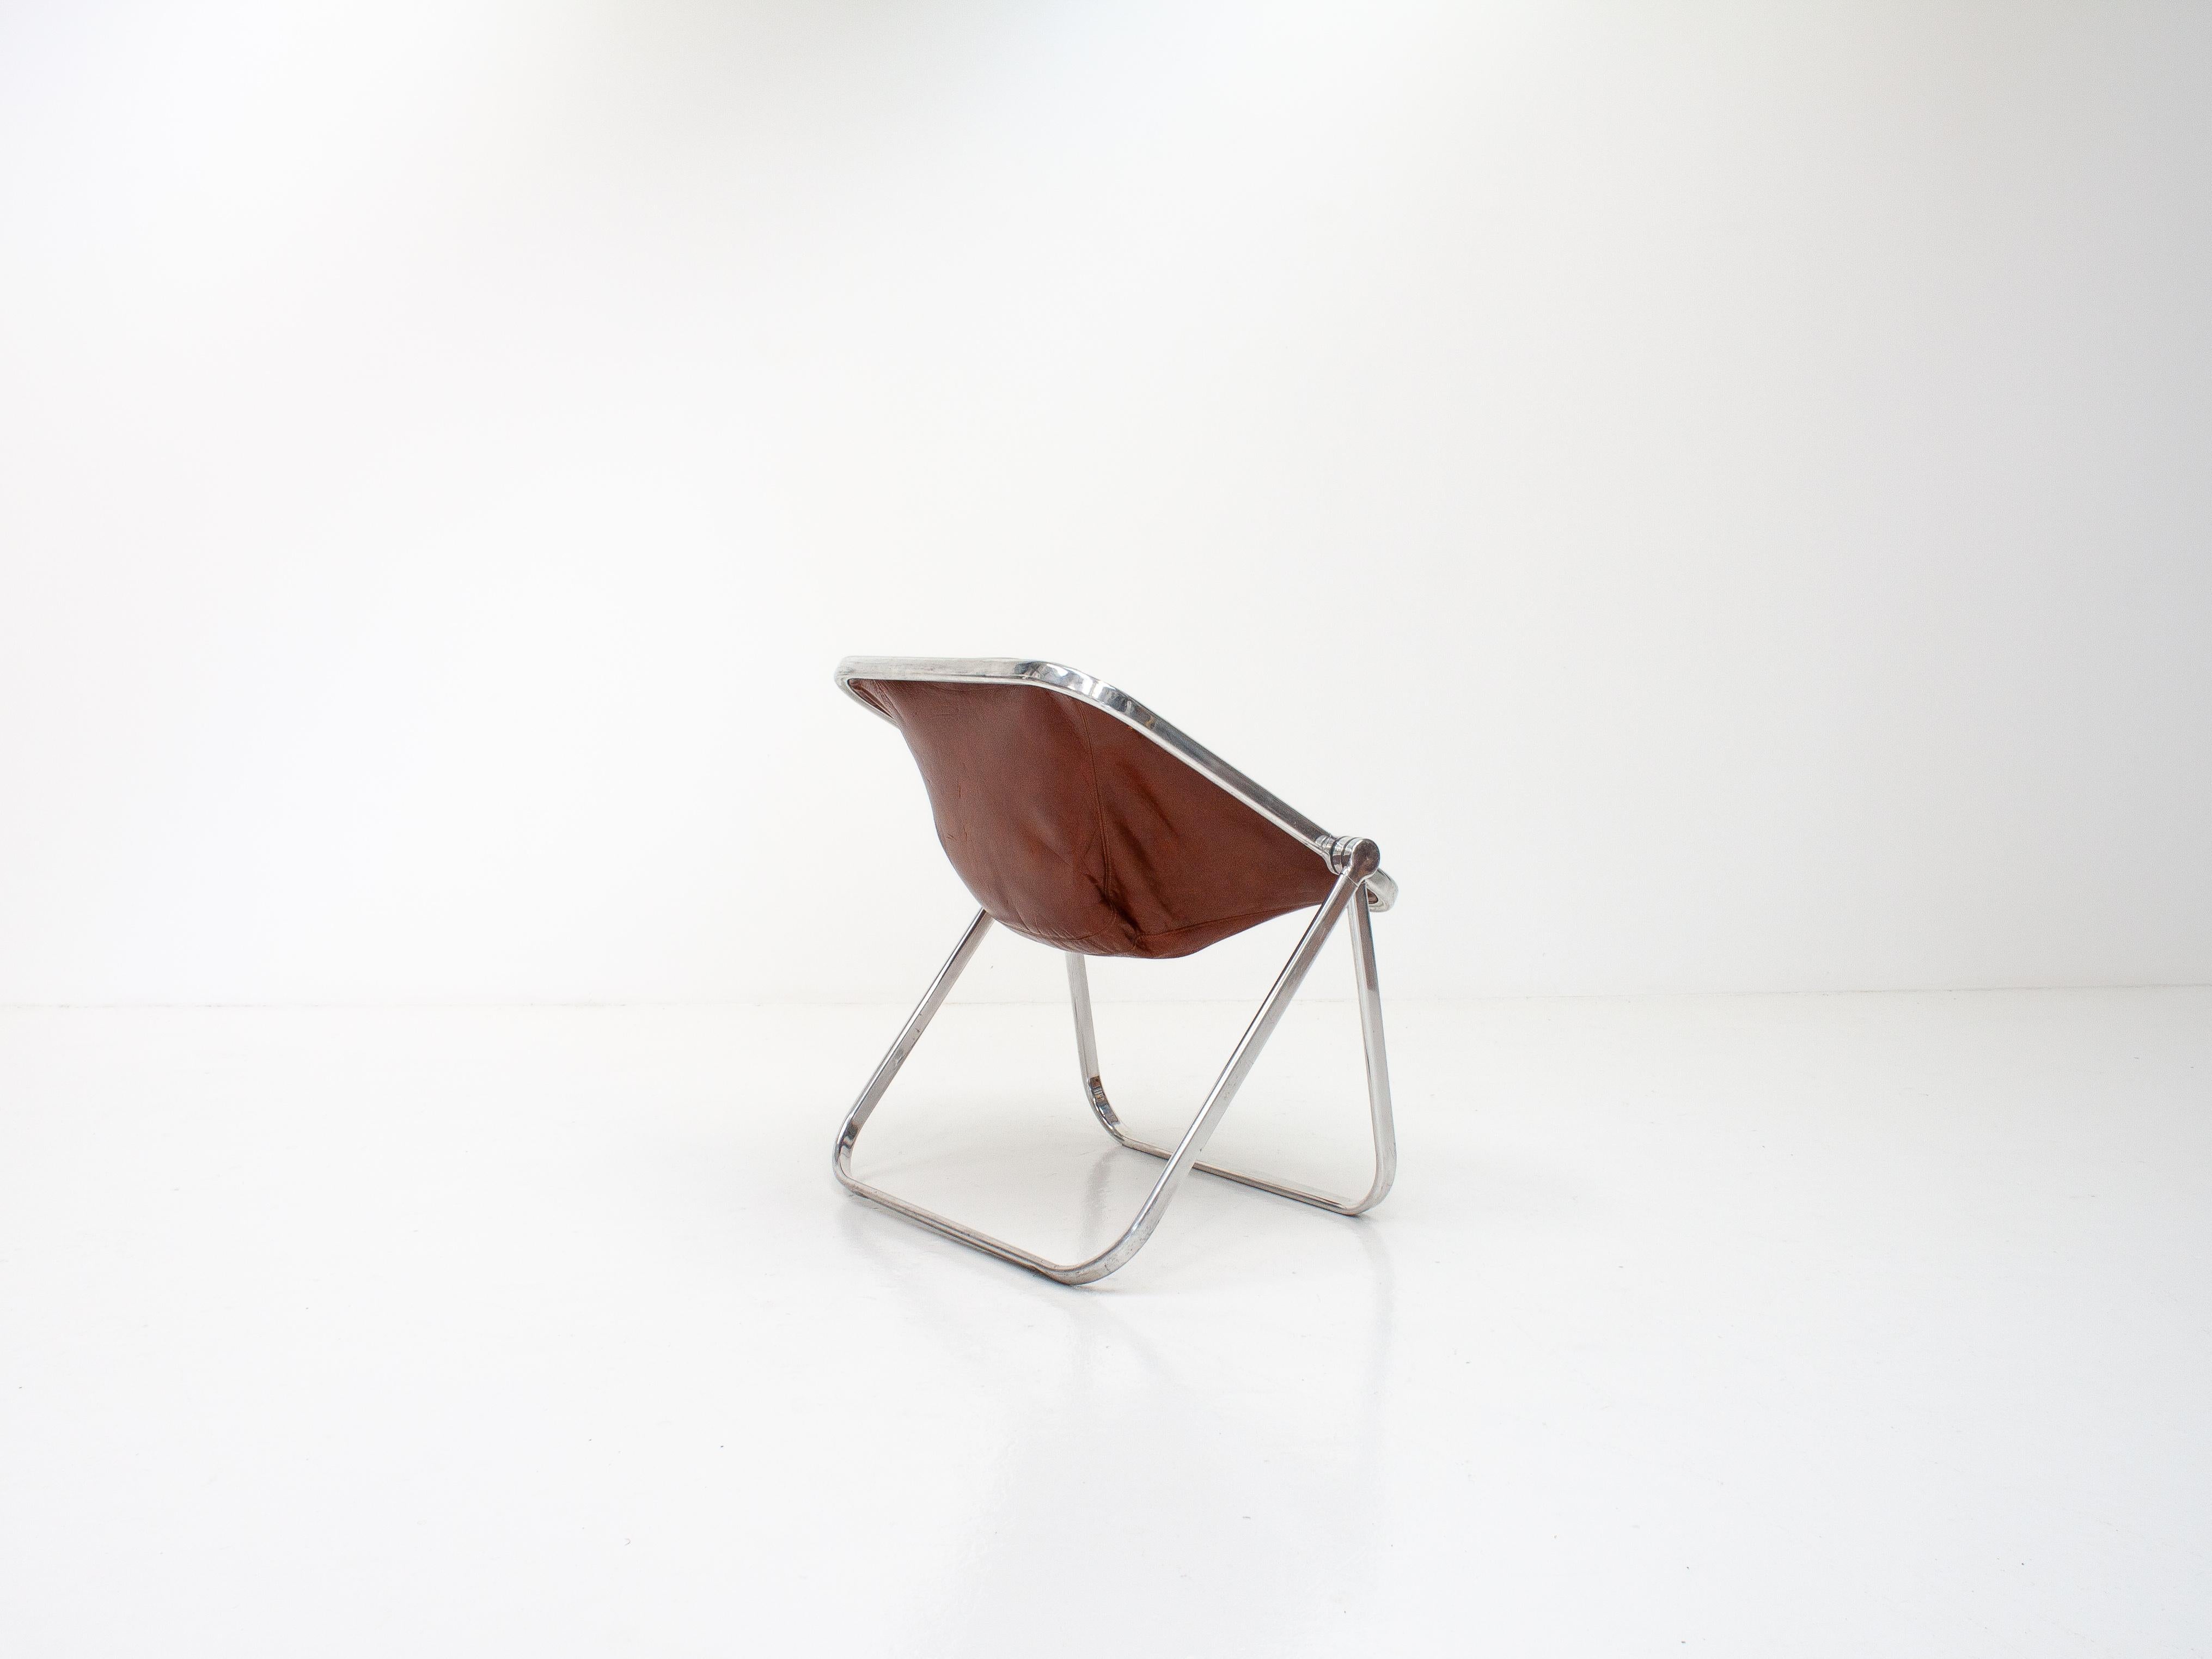 Aluminum Plona Folding Lounge Chair by Giancarlo Piretti for Castelli in 1969, Italy